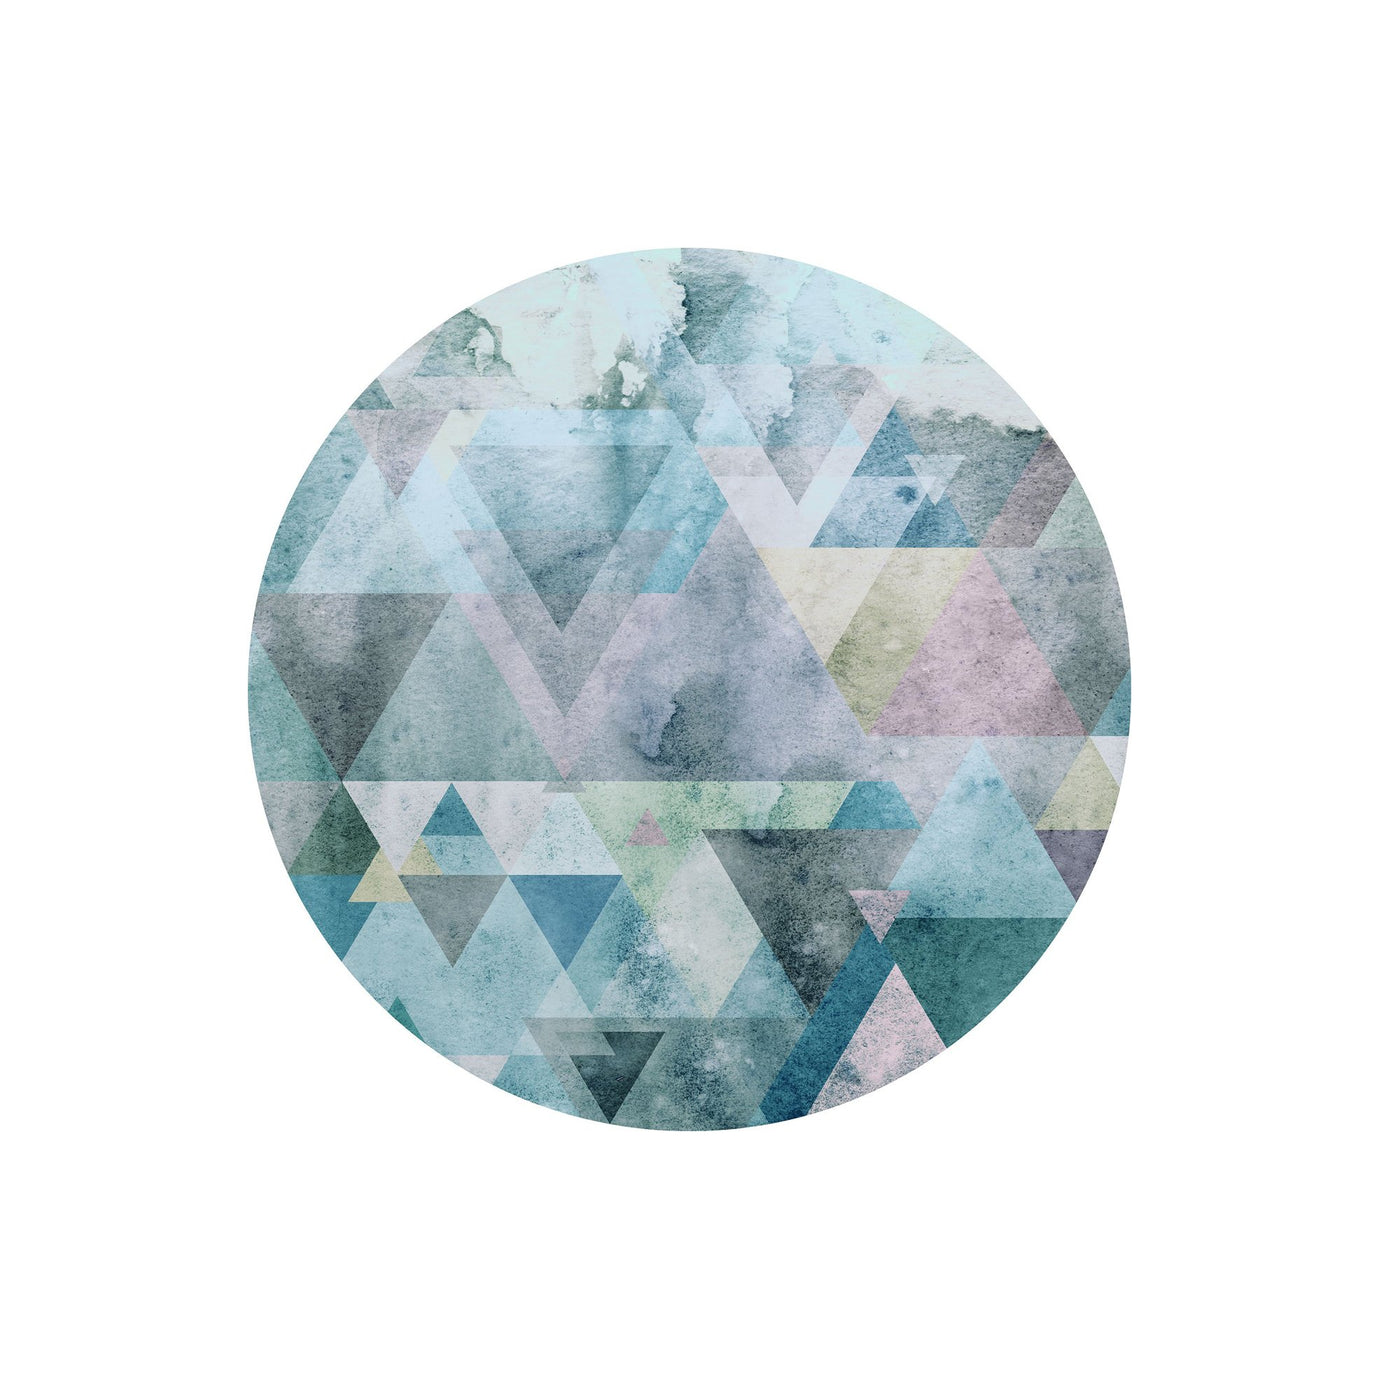 Cerulean Prisms Circle Wall Art (Self-Adhesive)-Wall Decor-ABSTRACT WALLPAPERS, ART WALLPAPER, CIRCLE WALL ART, ECO MURALS, NATURE WALL ART, PATTERN WALLPAPERS, SUSTAINABLE DECOR-Forest Homes-Nature inspired decor-Nature decor